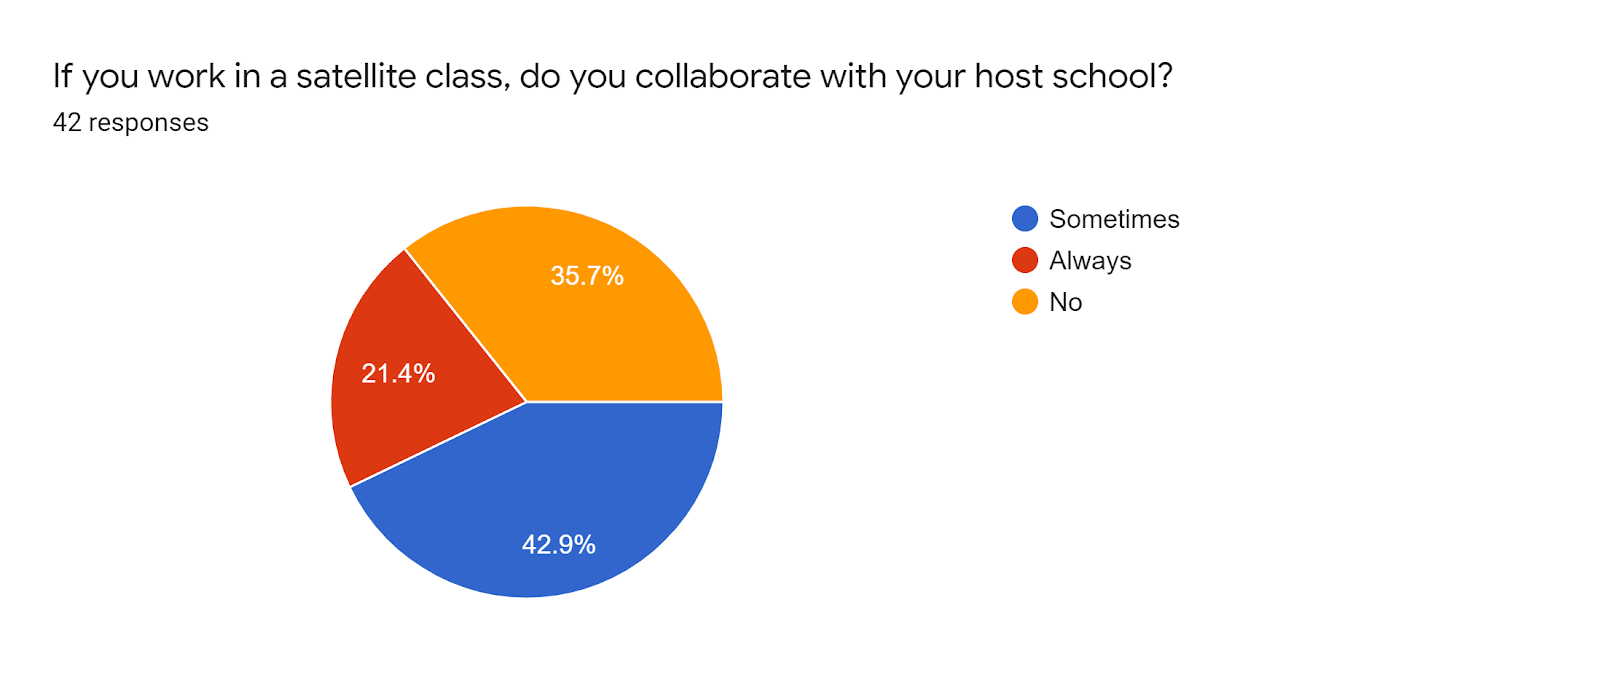 Forms response chart. Question title: If you work in a satellite class, do you collaborate with your host school?. Number of responses: 42 responses.